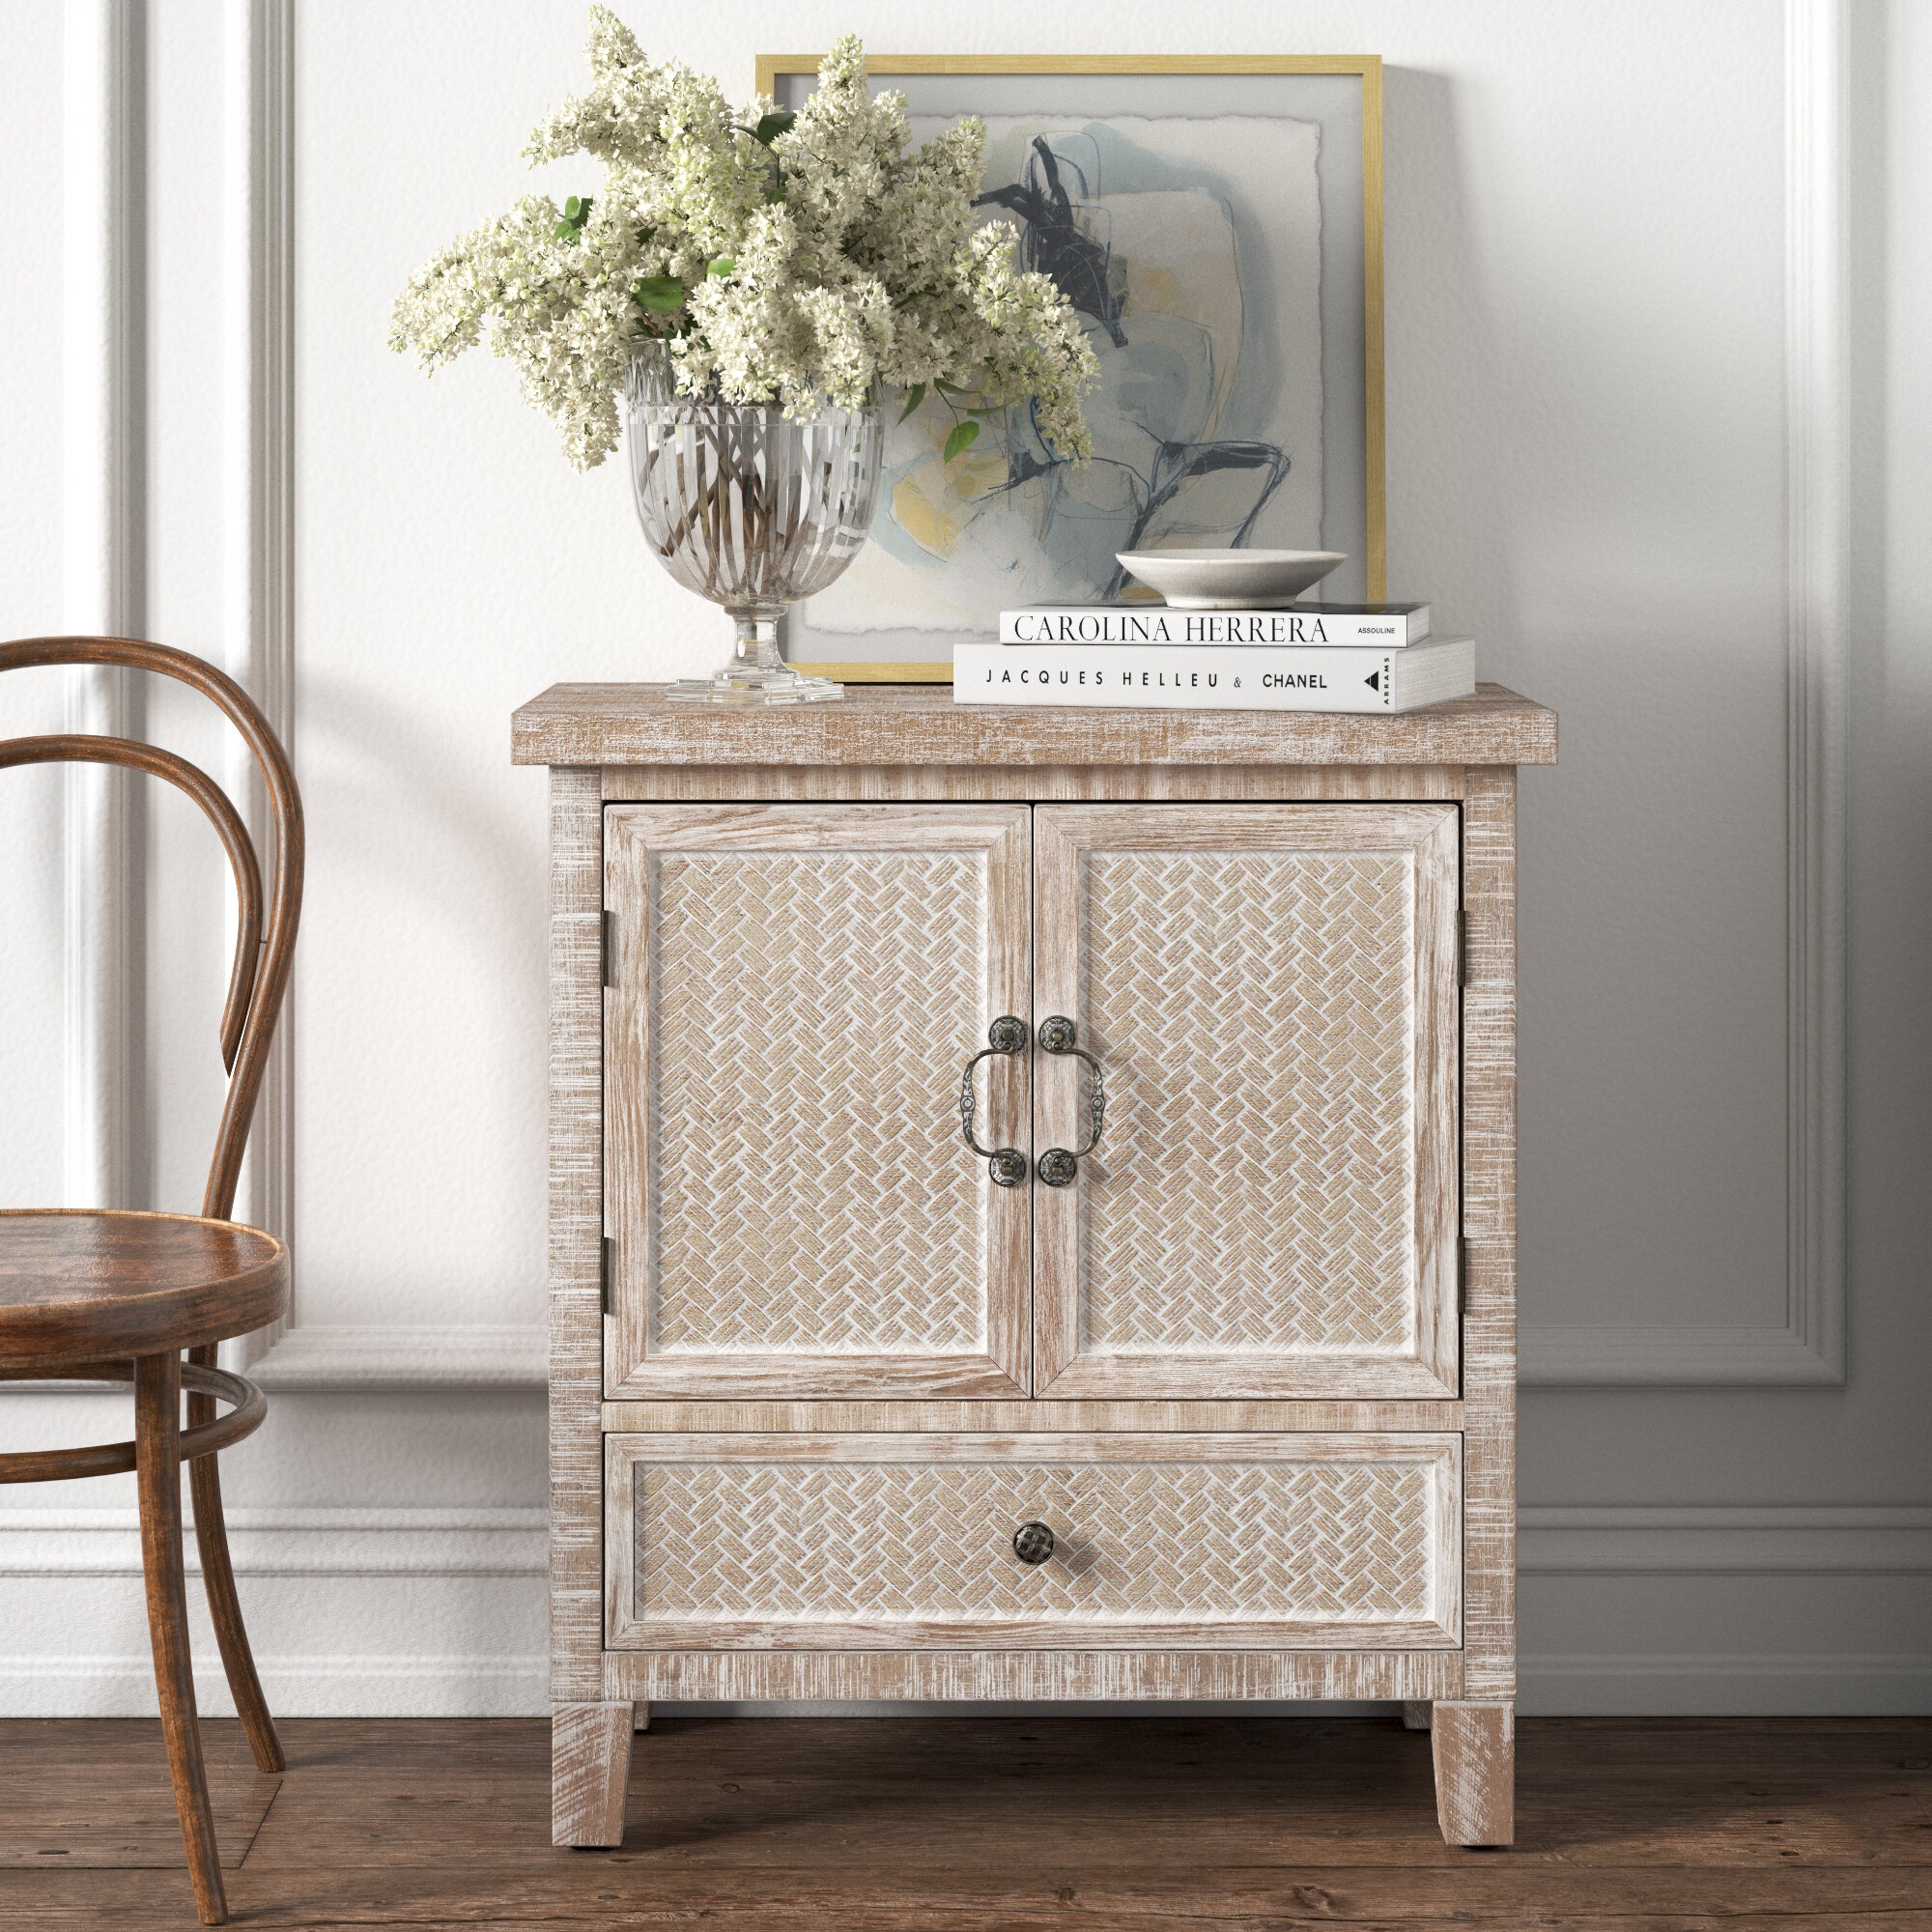 Elegant and Refined, A French Cabinet Destined for Louis Blue